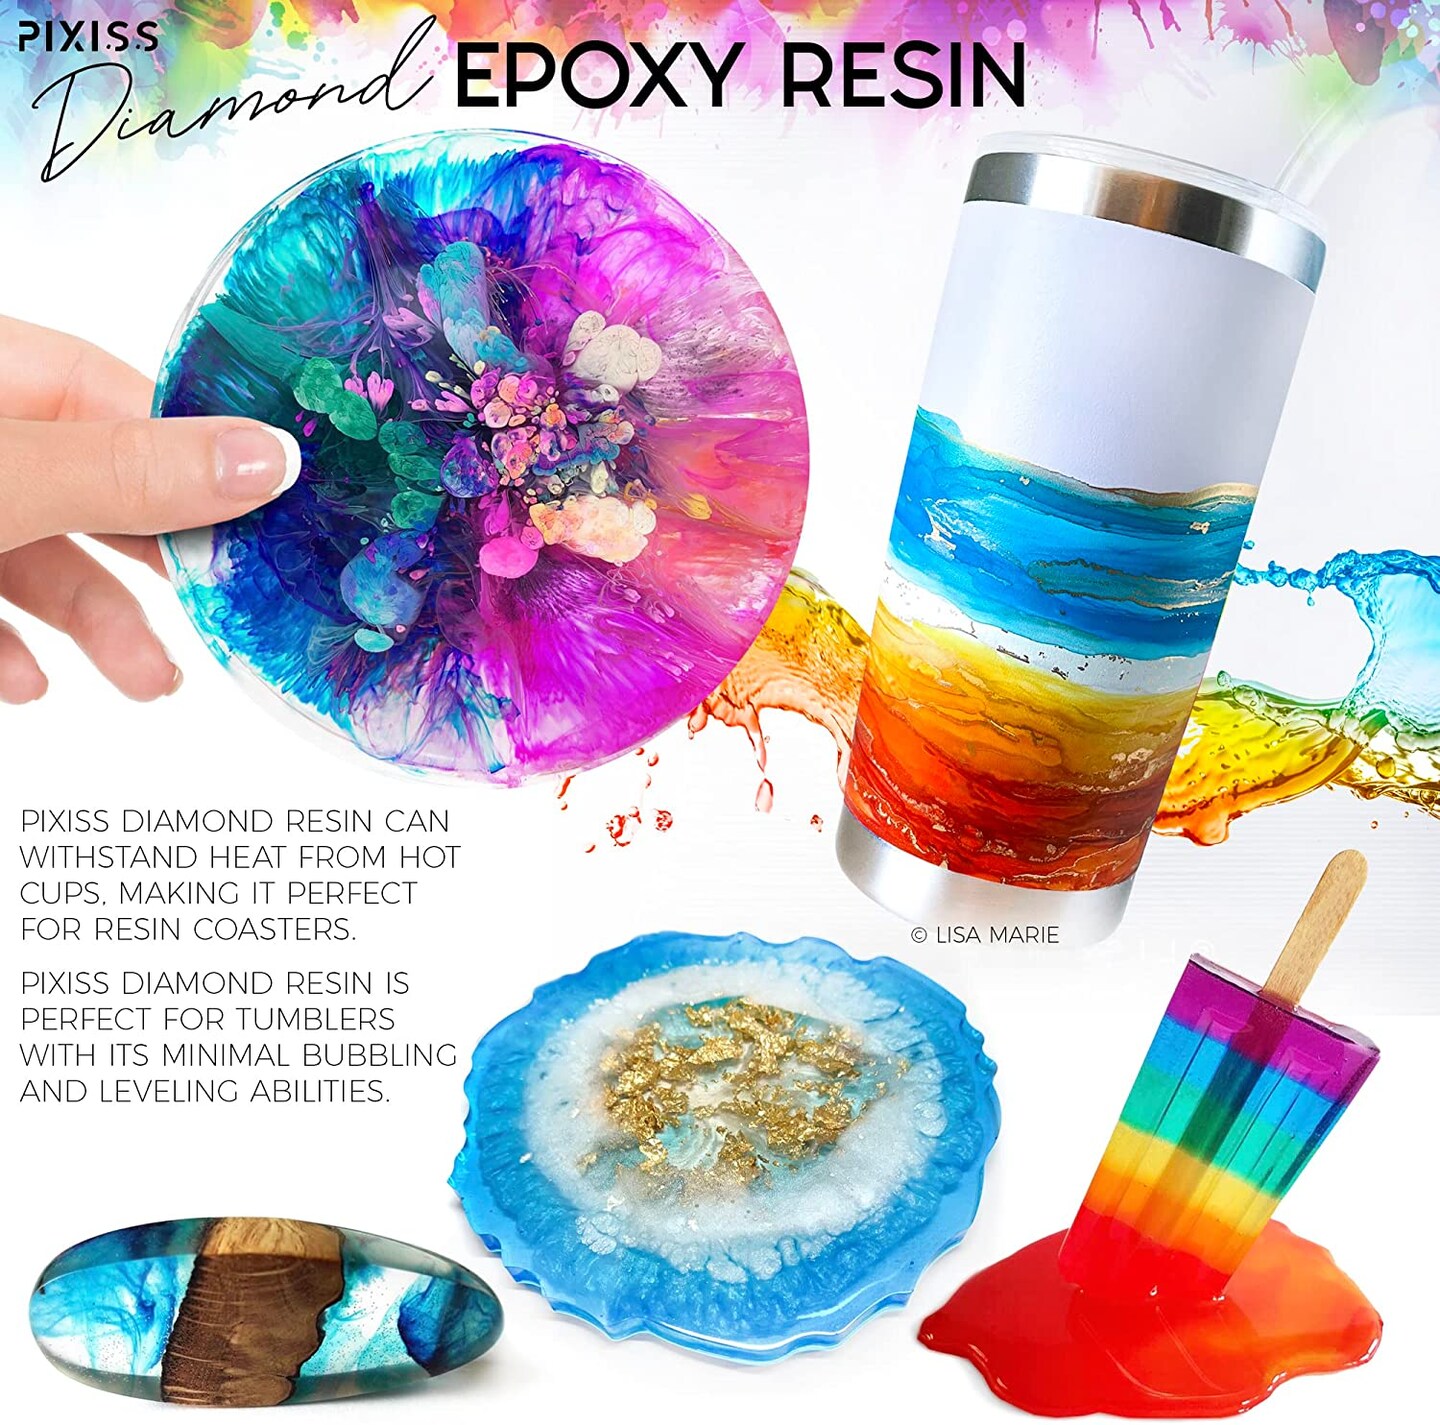 Epoxy Resin Kit Epoxy Resin Molds Silicone Kit Bundle | Pixiss Easy Mix 1:1  (17-Ounce Kit) | Epoxy Resin Mixing Cups and Supplies for